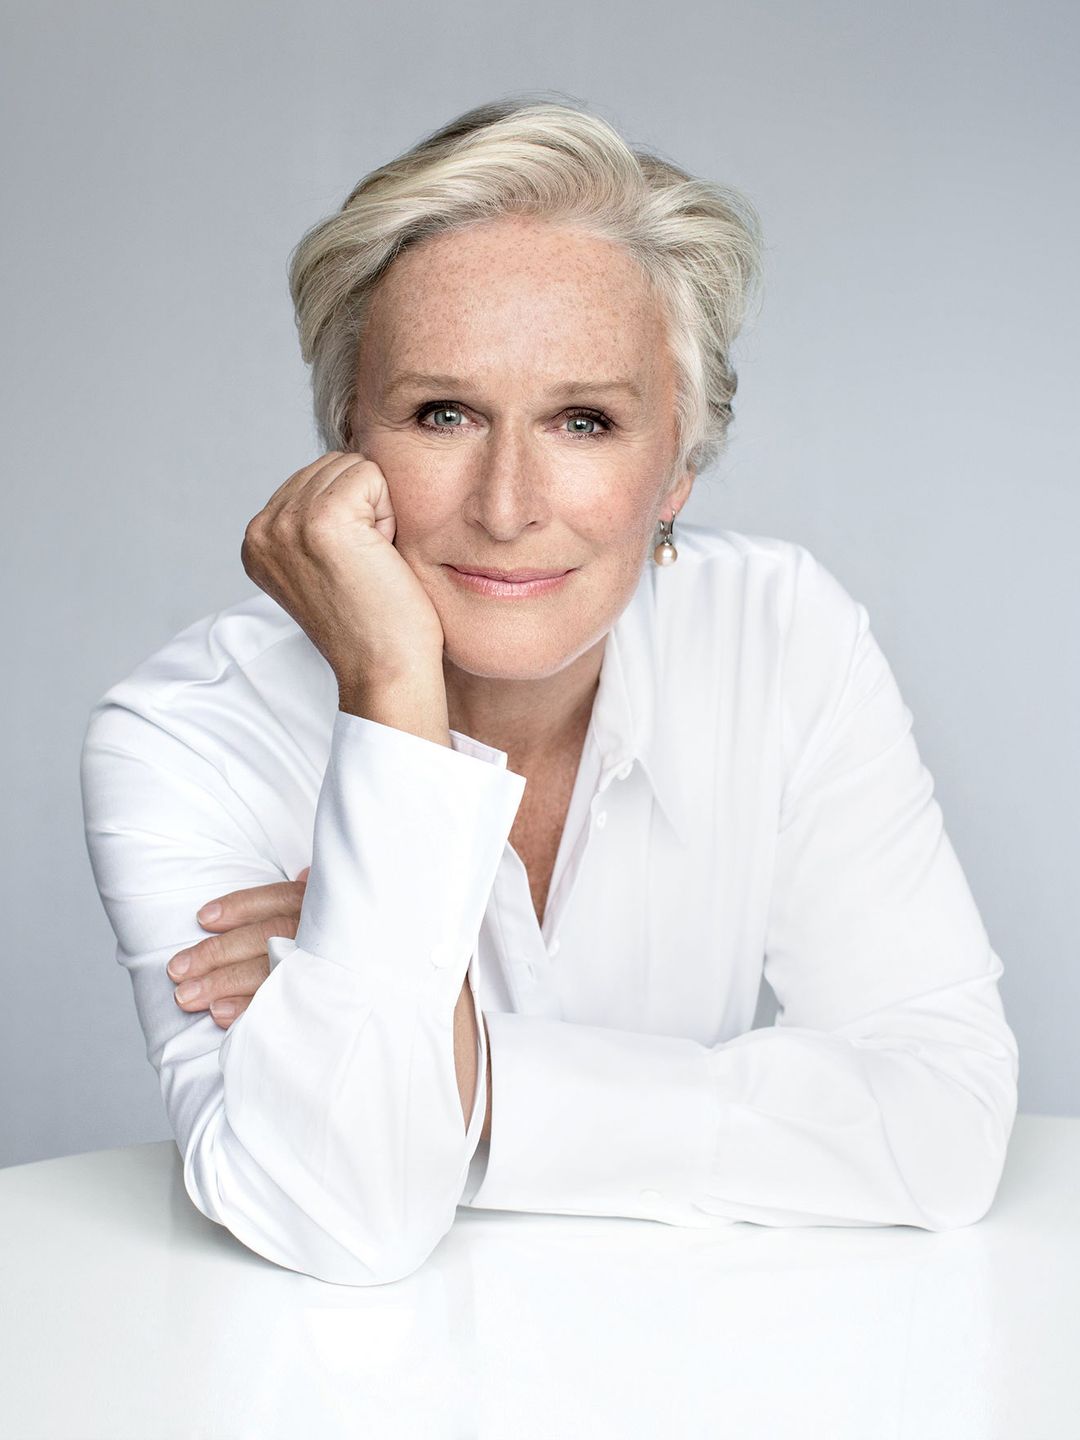 Glenn Close who is her father